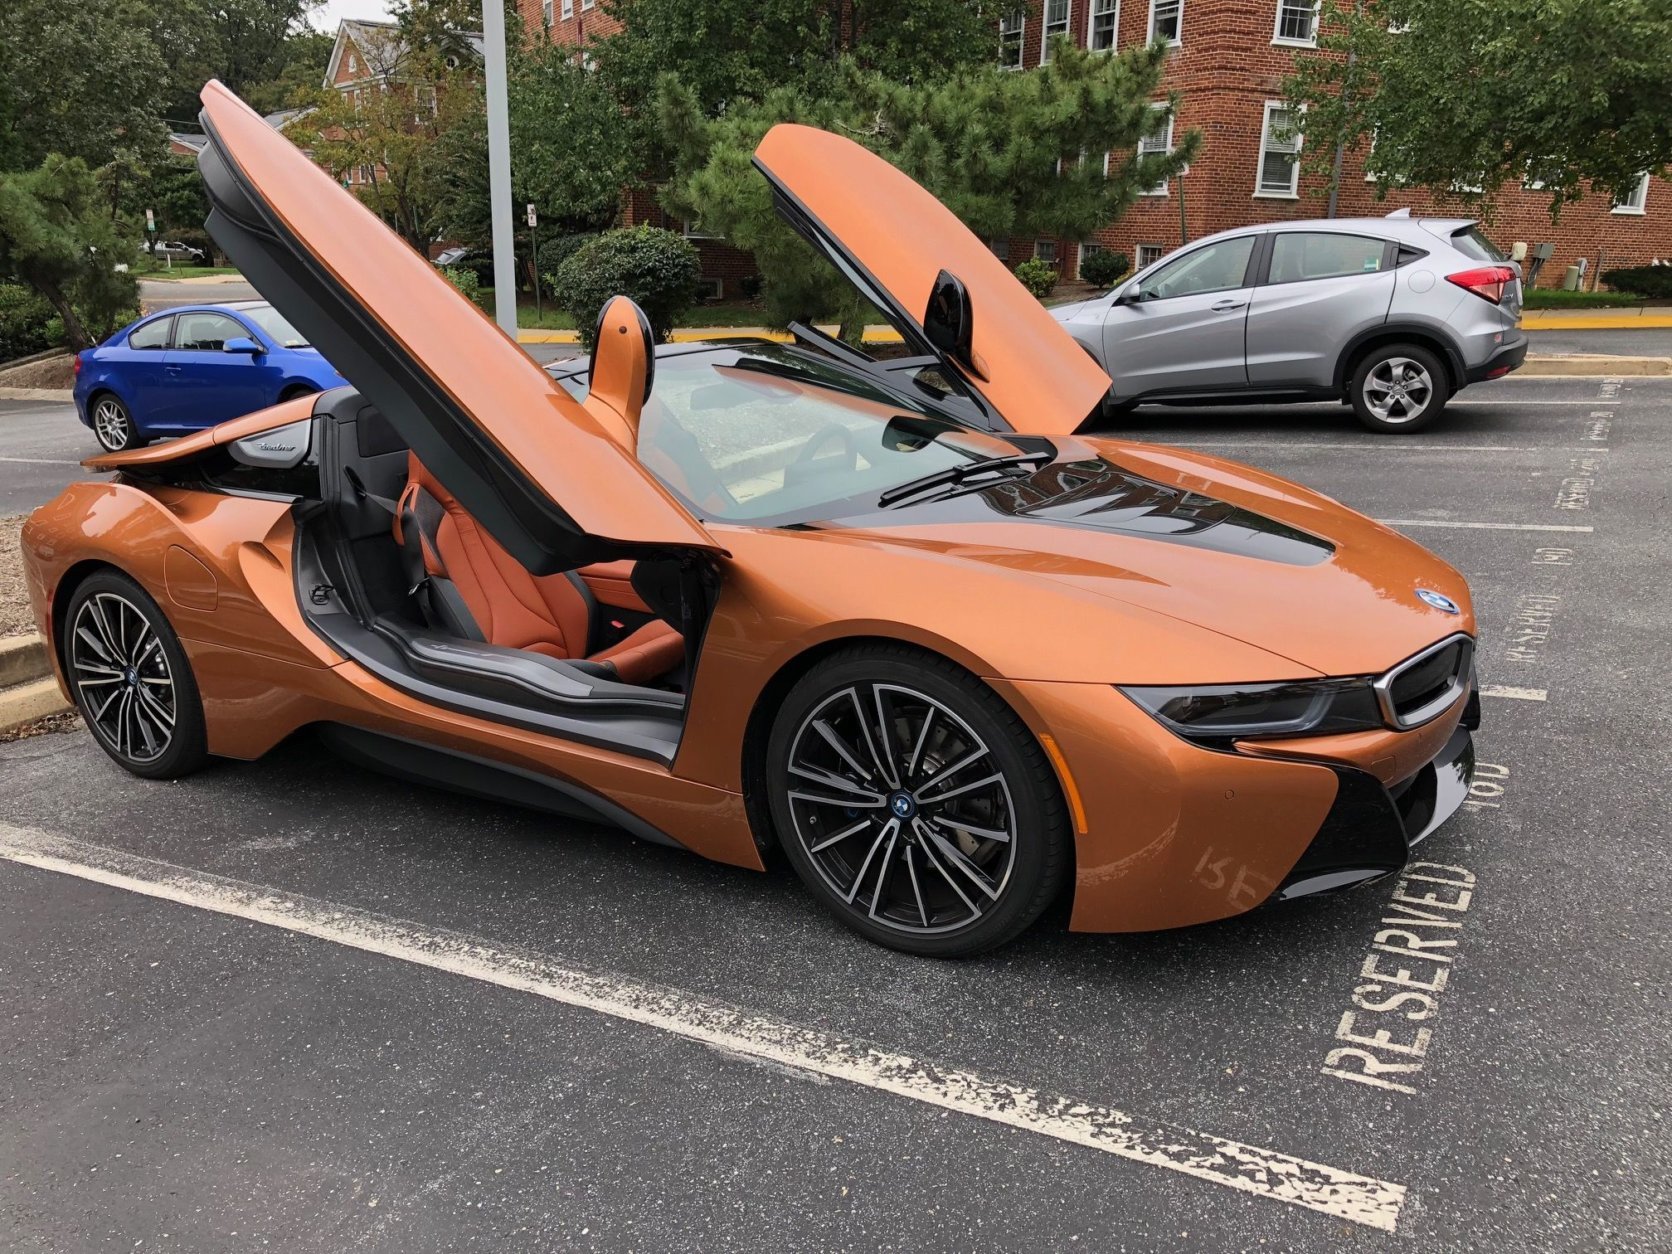 There are no normal opening doors on the BMW i8 Roadster. The doors flip up because this is an exotic plug-in hybrid. (WTOP/Mike Parris)